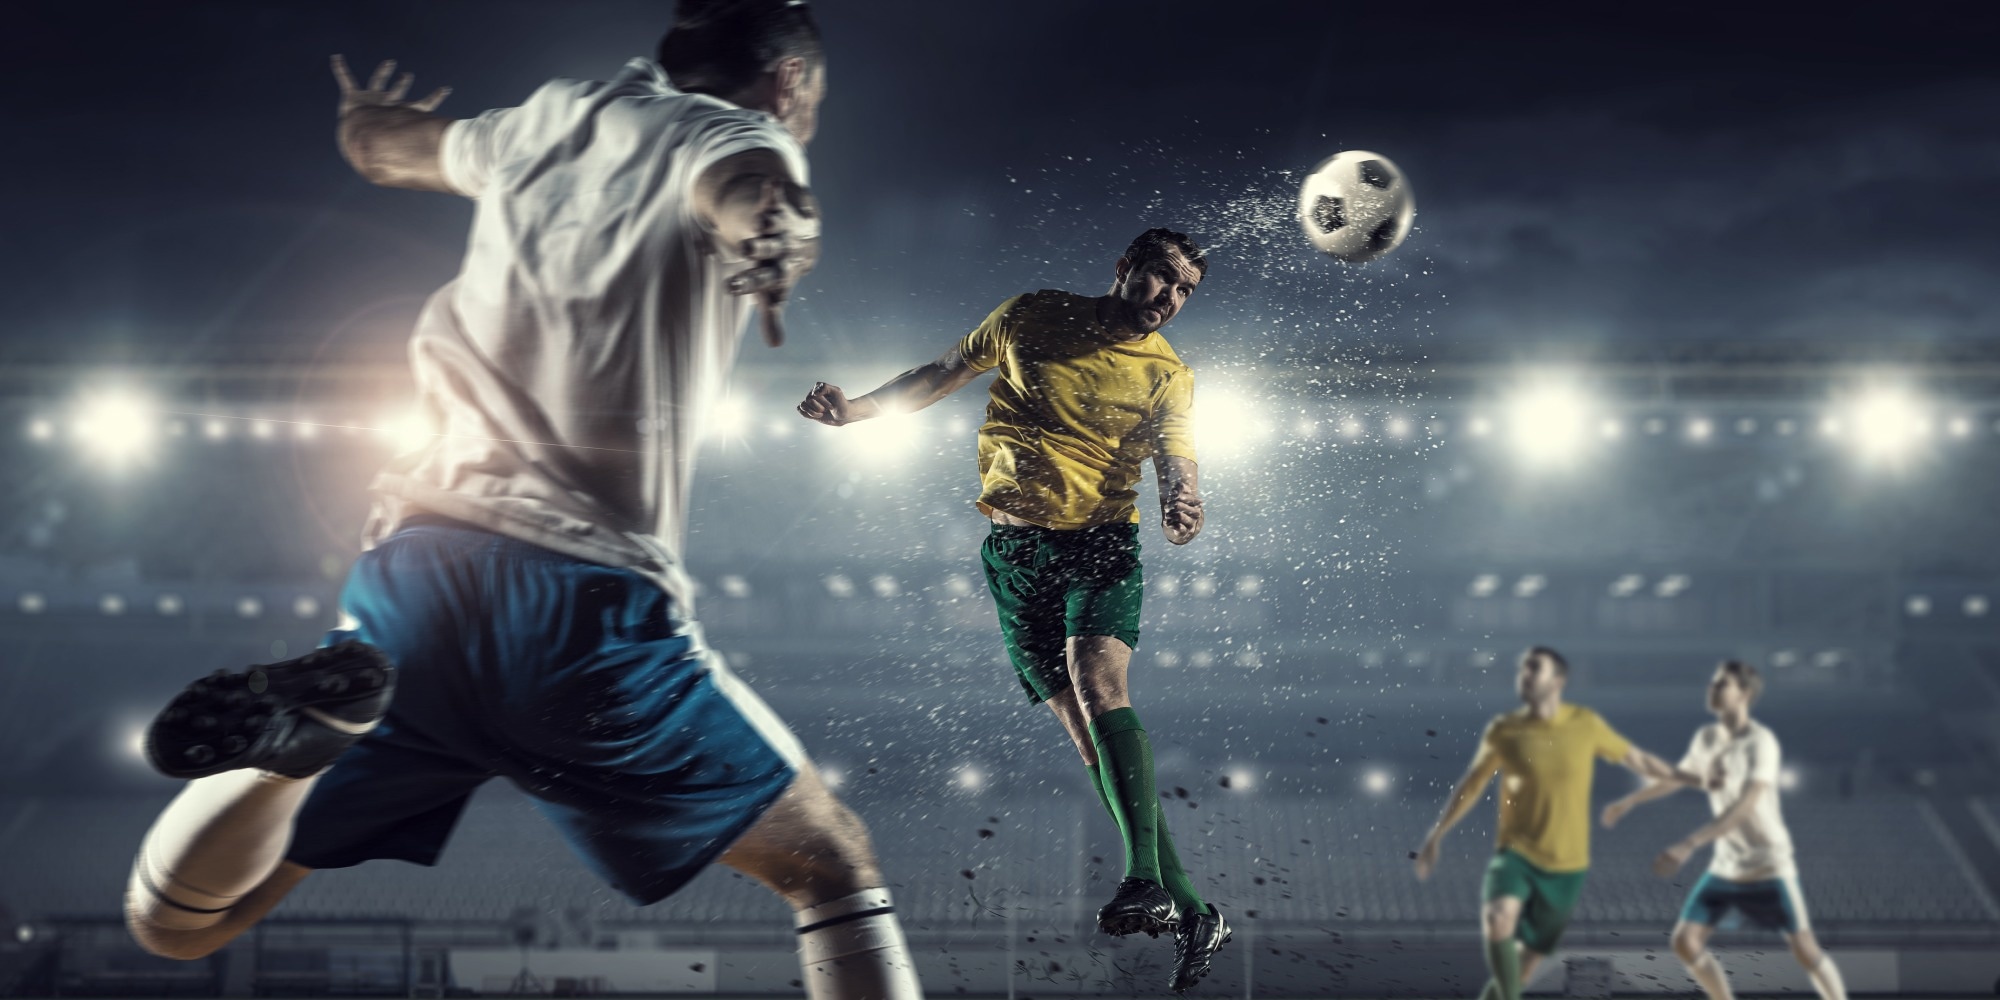 Heading Frequency and Risk of Cognitive Impairment in Retired Male Professional Soccer Players